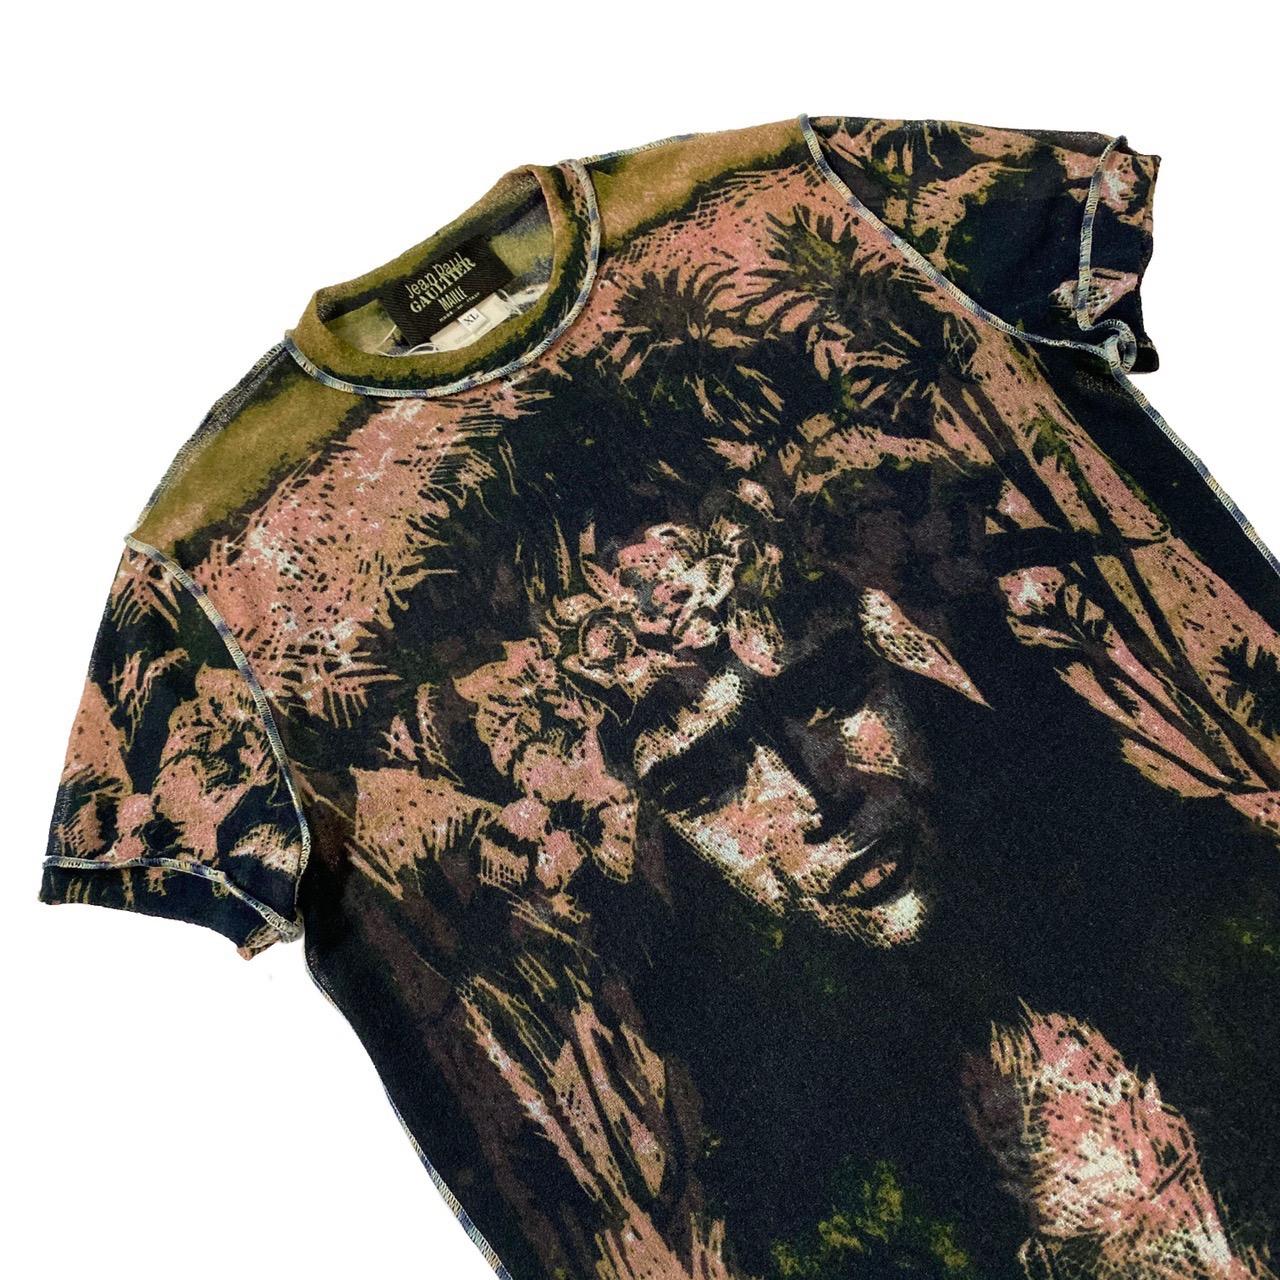 Jean Paul Gaultier mesh t-shirt featuring Polynesian print from the Spring/Summer 2000 collection

Size XL, stretchable fabric 

Shoulder to shoulder - 40cm / 15,7 inches 
Pit to pit - 45cm / 17,7 inches 
Shoulder to waist - 65cm / 25,5 inches